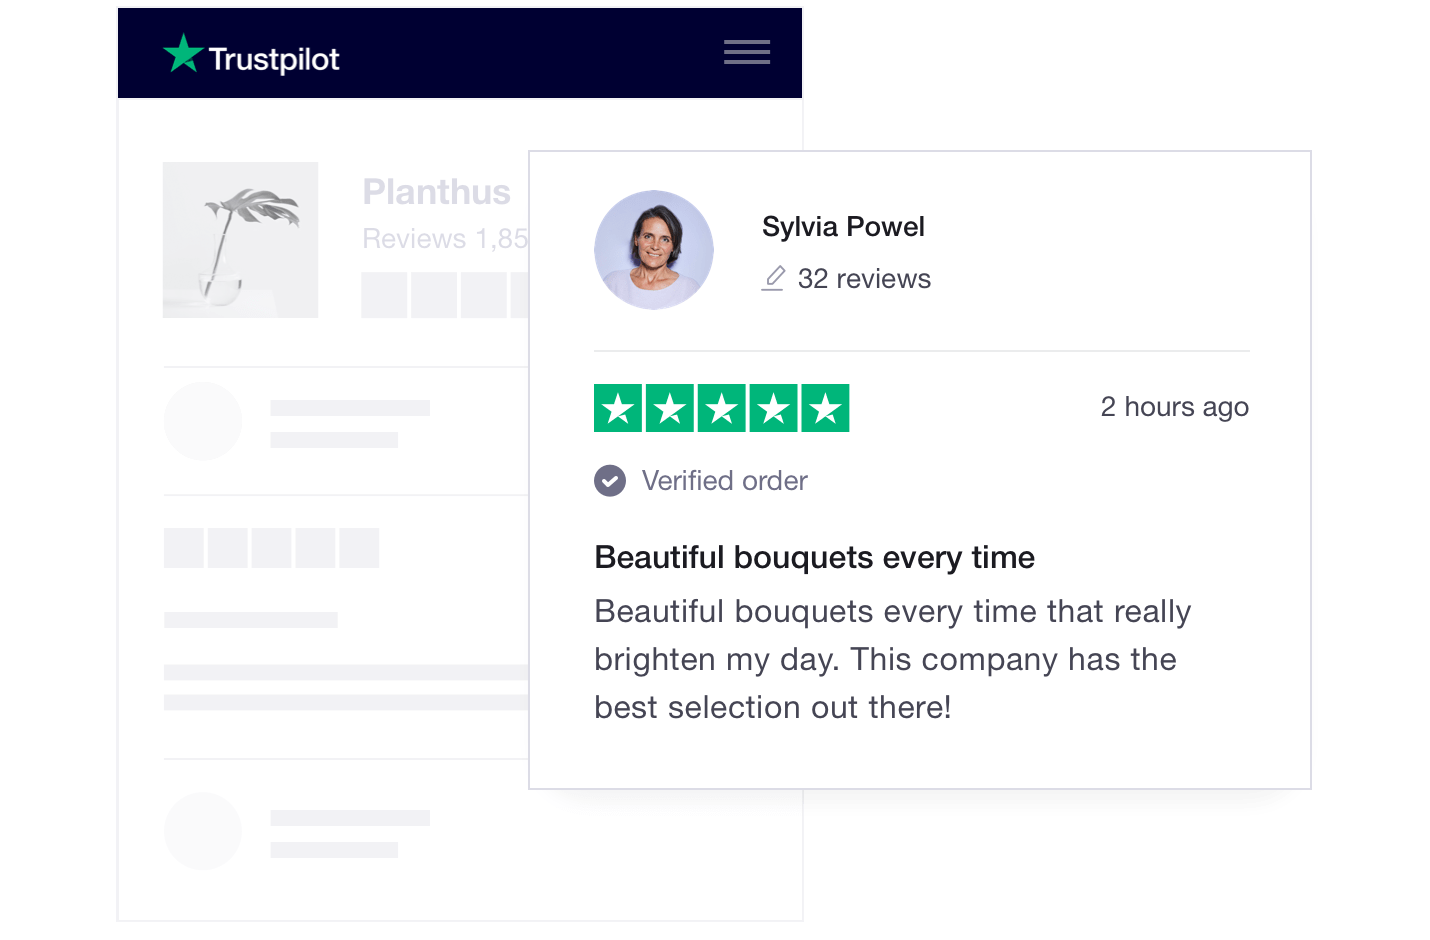 Trustpilot Business: Collect Customer Service & Product Reviews